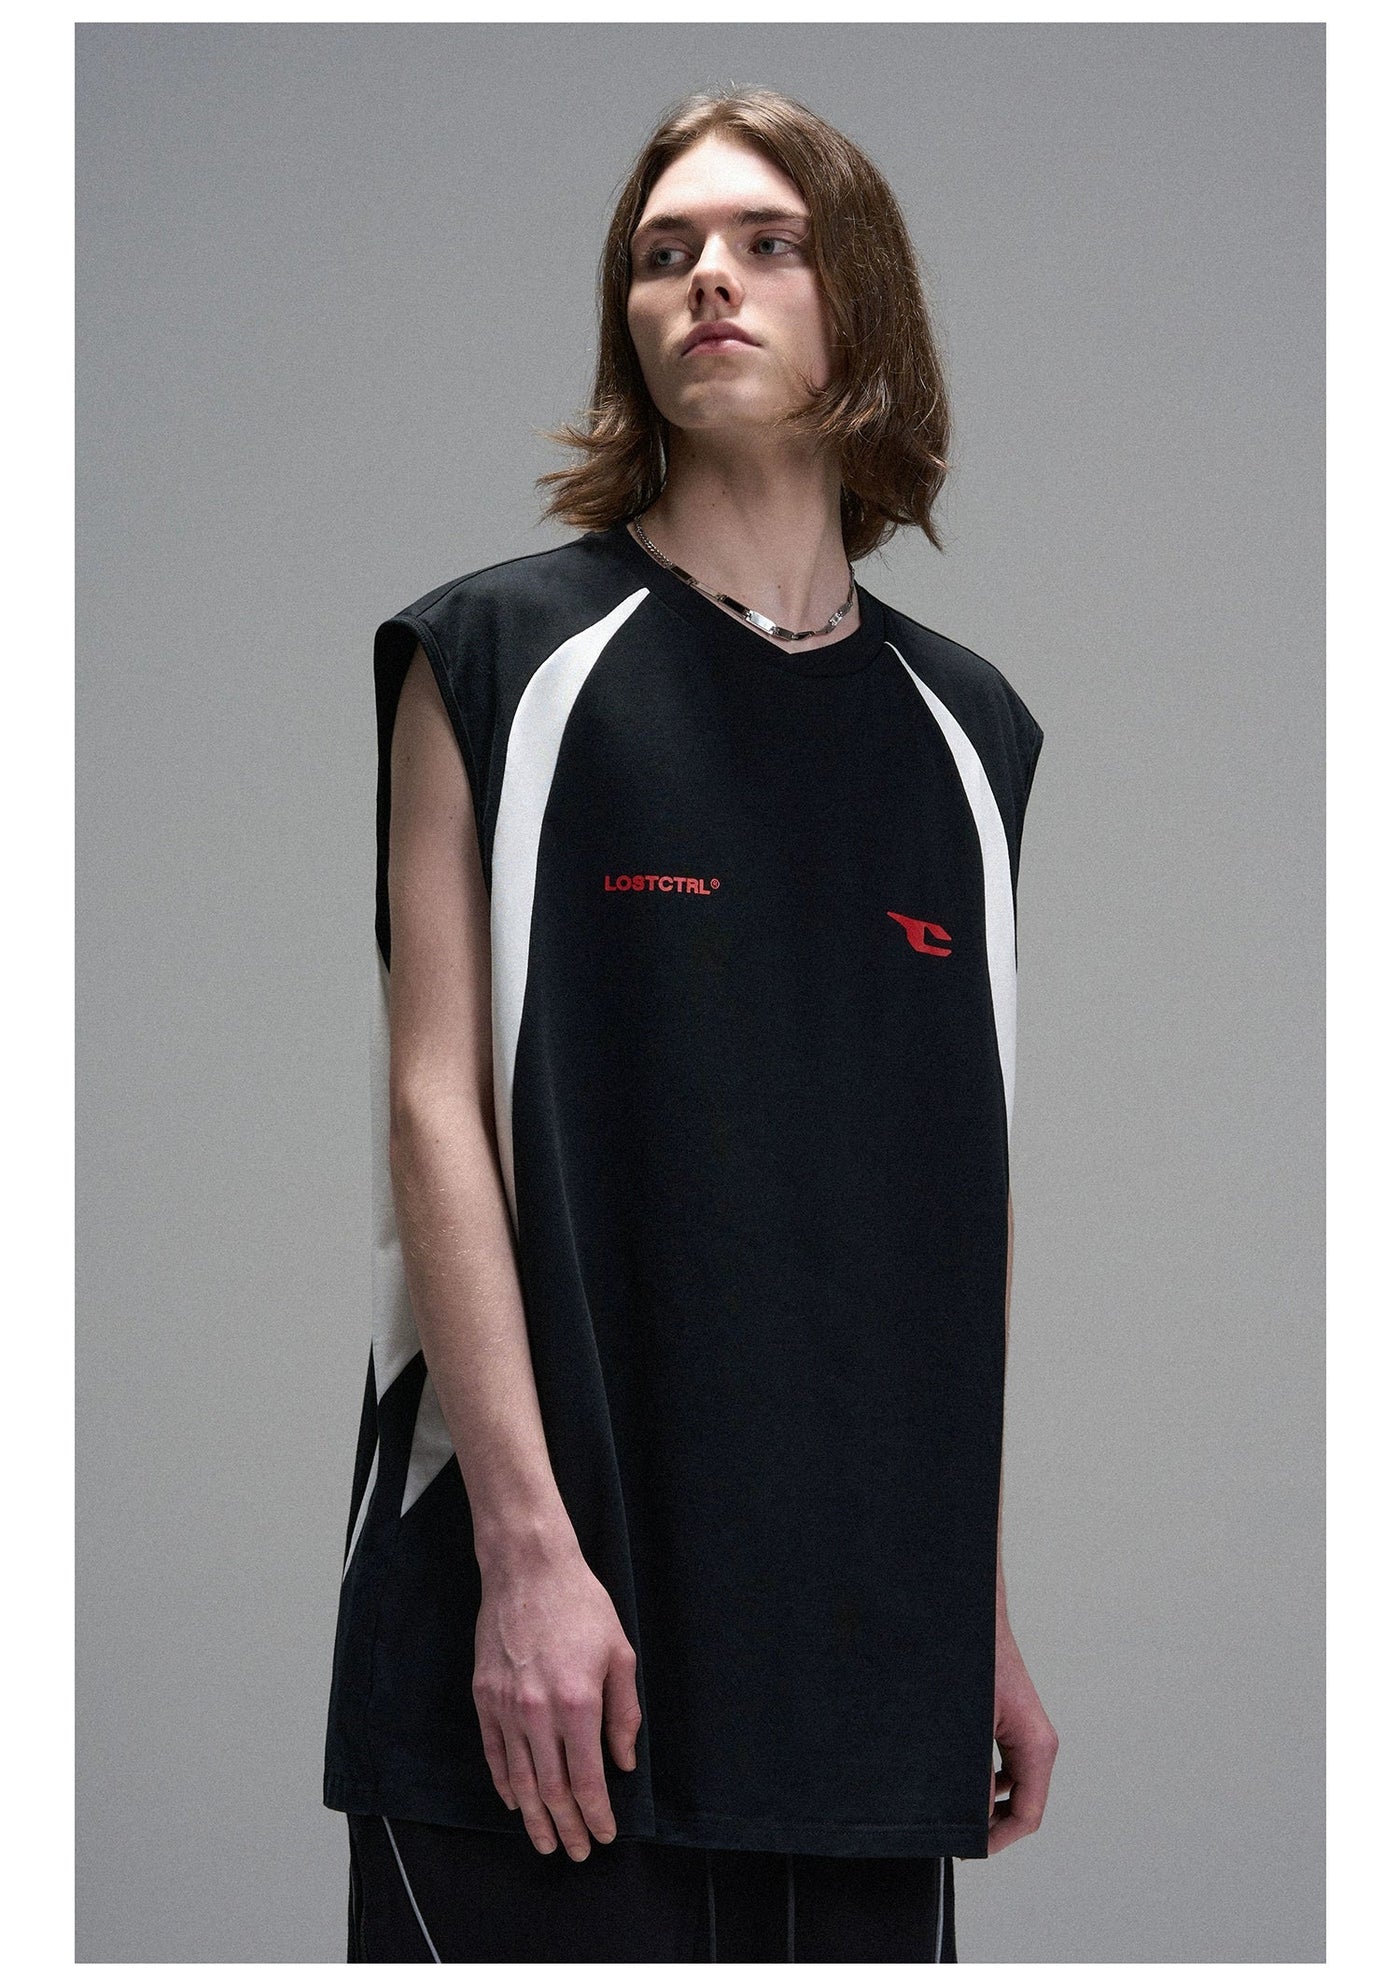 Blade Splices Racing Tank Top Korean Street Fashion Tank Top By Lost CTRL Shop Online at OH Vault